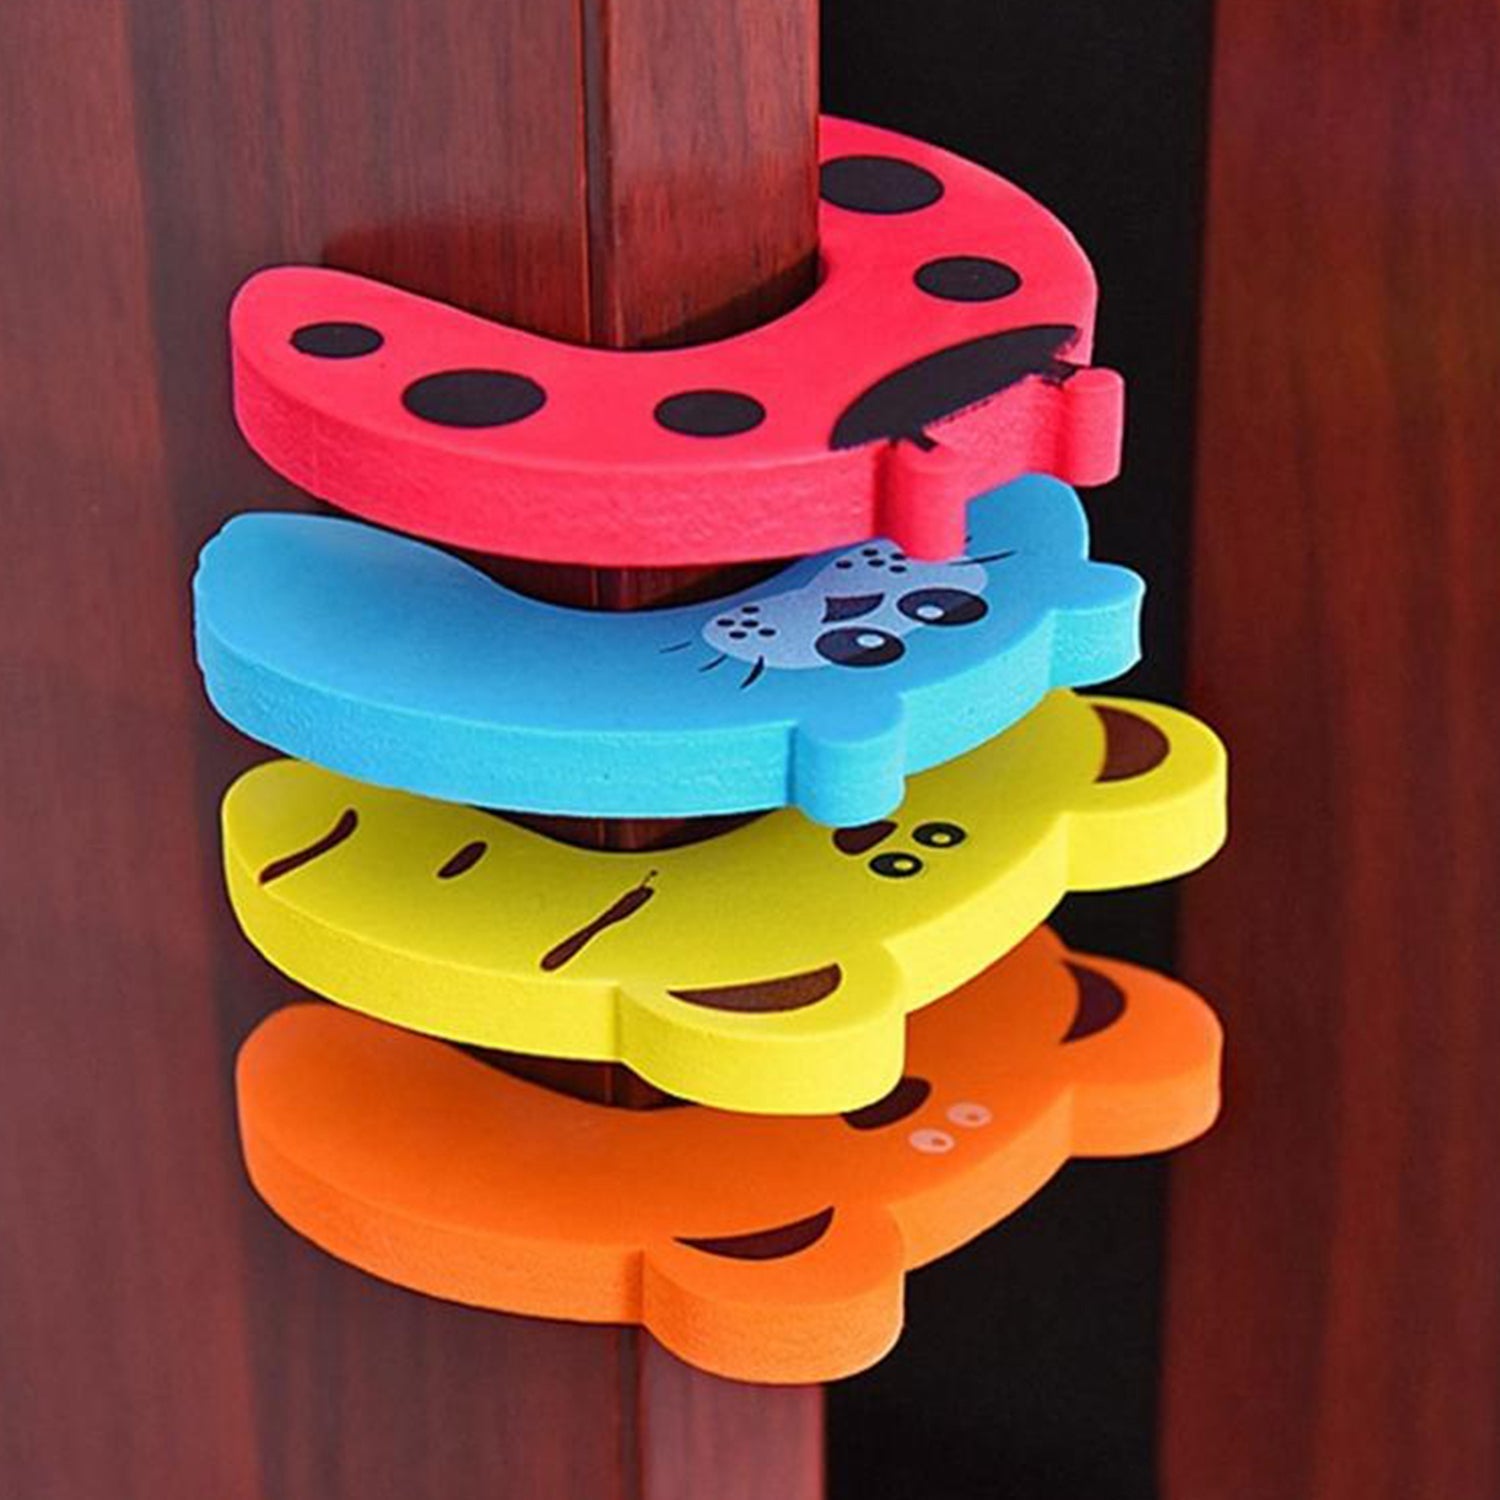 6130 1 Pc Mix Door Stopper used in all kinds of household and official places specially, for controlling motion of doors.